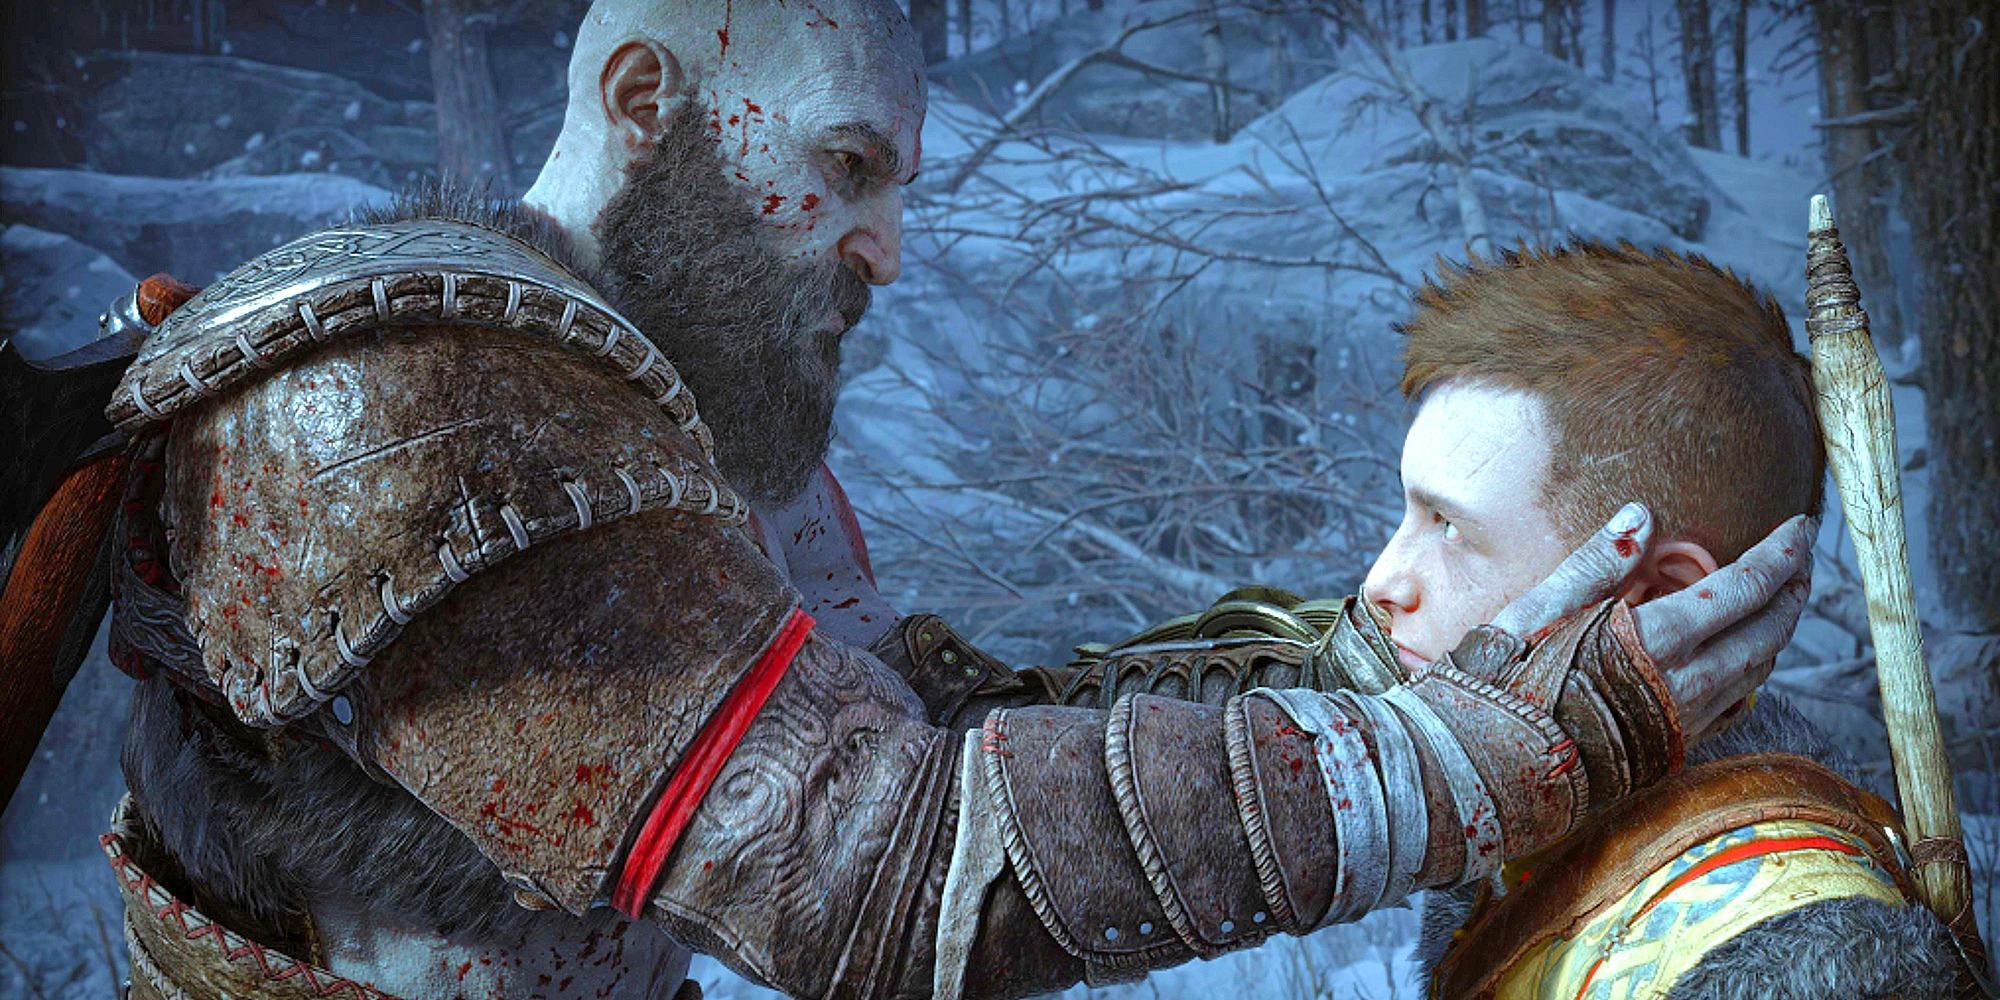 Why God of War: Ragnarok's Tyr May Not Get Along With Atreus